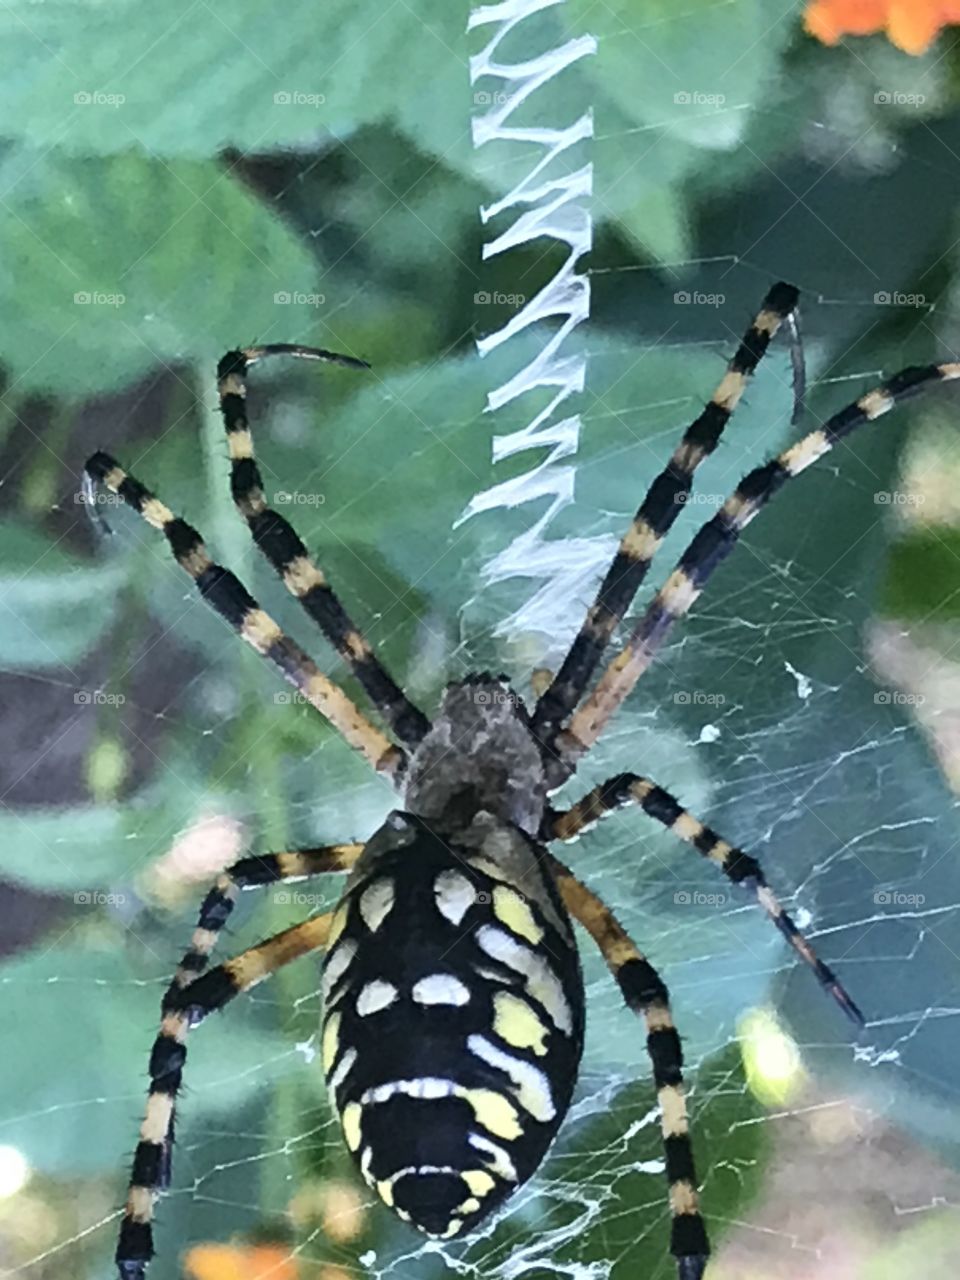 Spider on its web over a plant